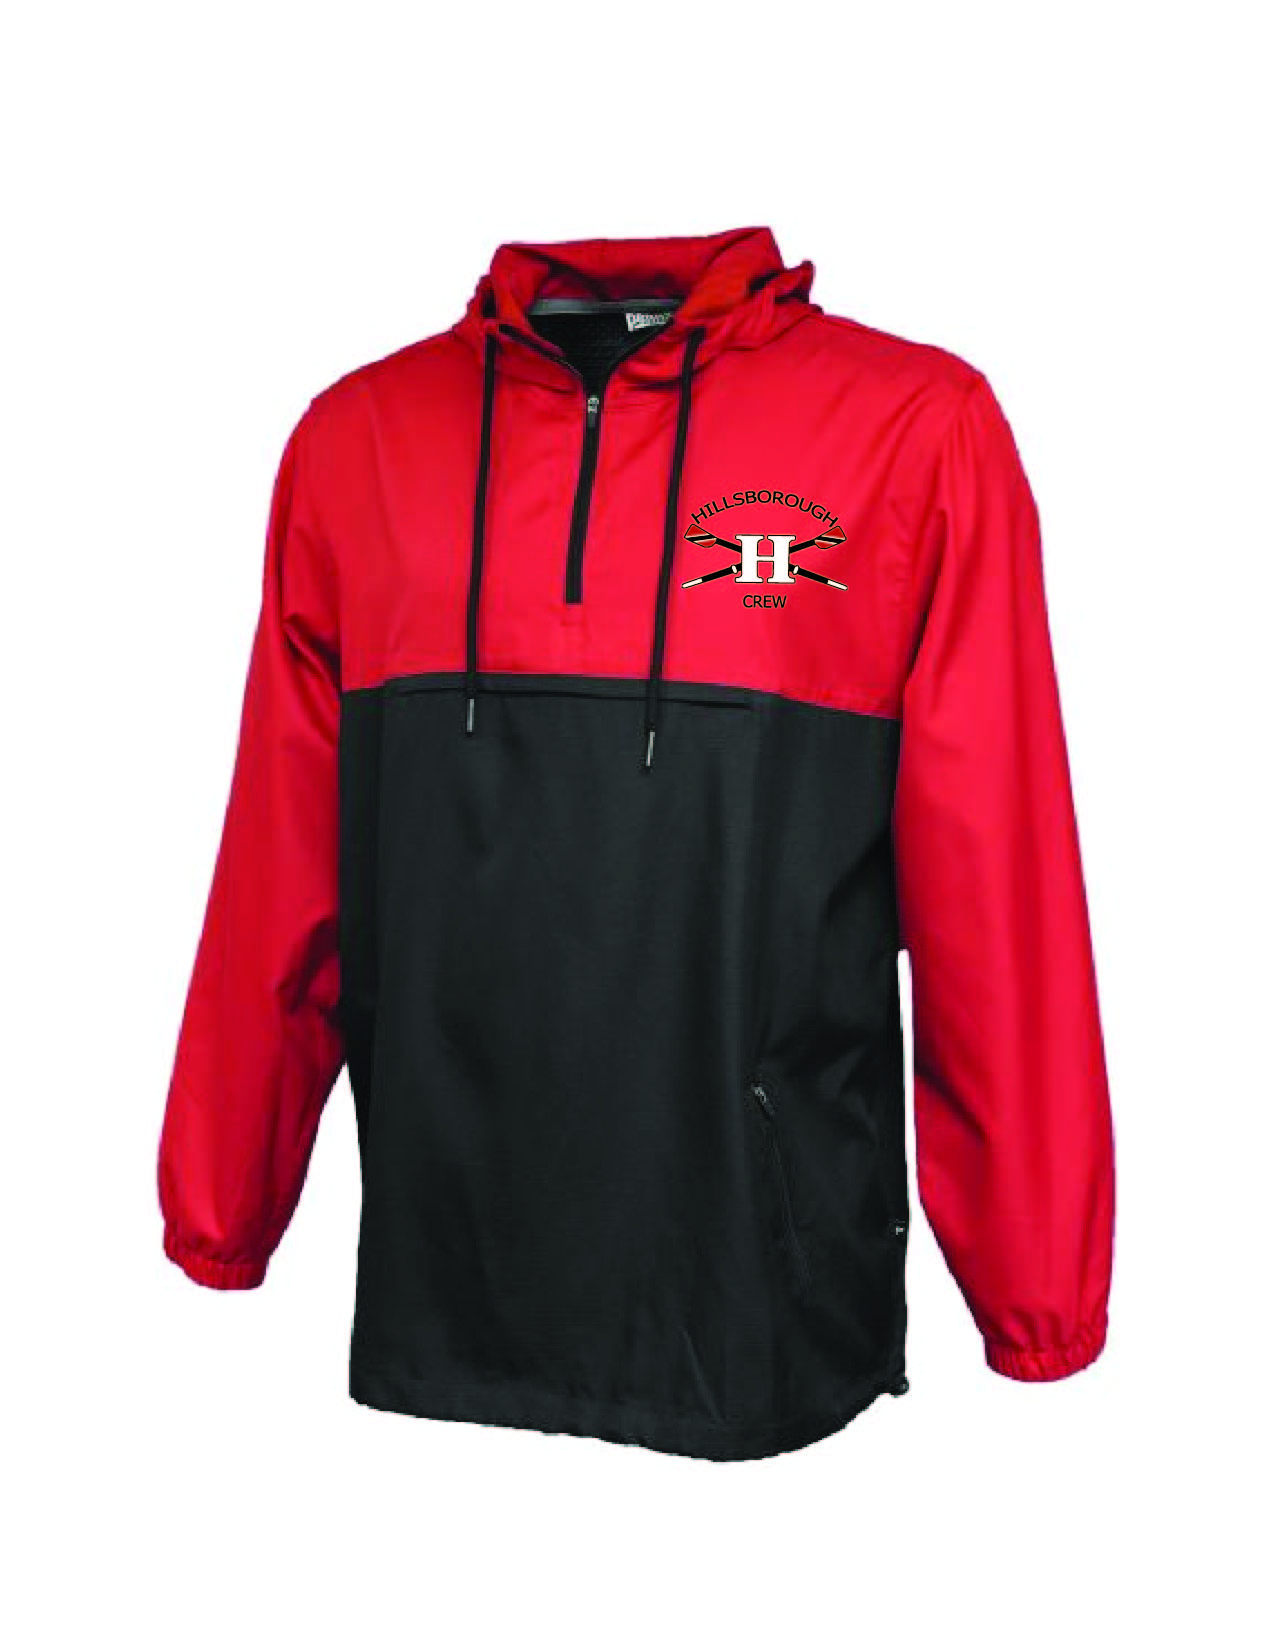 M - HHS Rowing Anorak Jacket